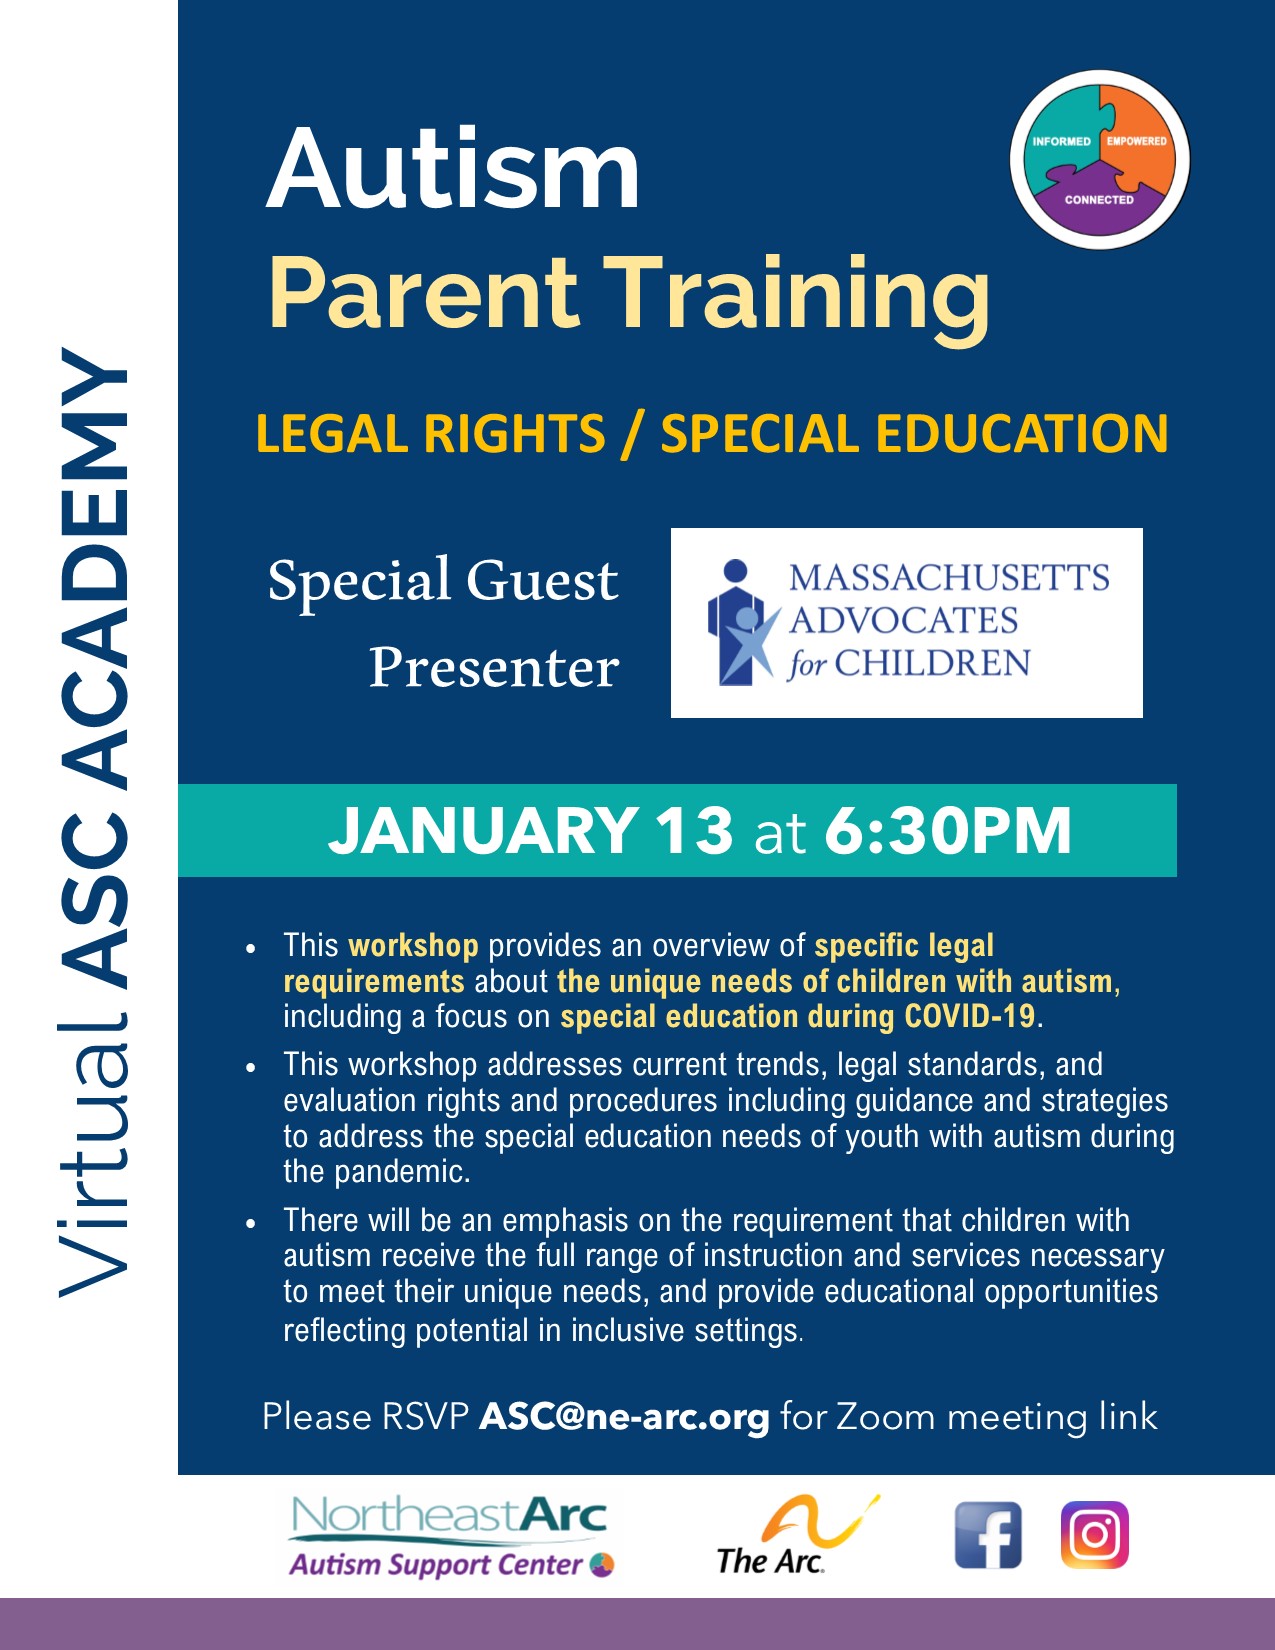 Flyer for Autism Parent Training - Legal Rights / Special Education